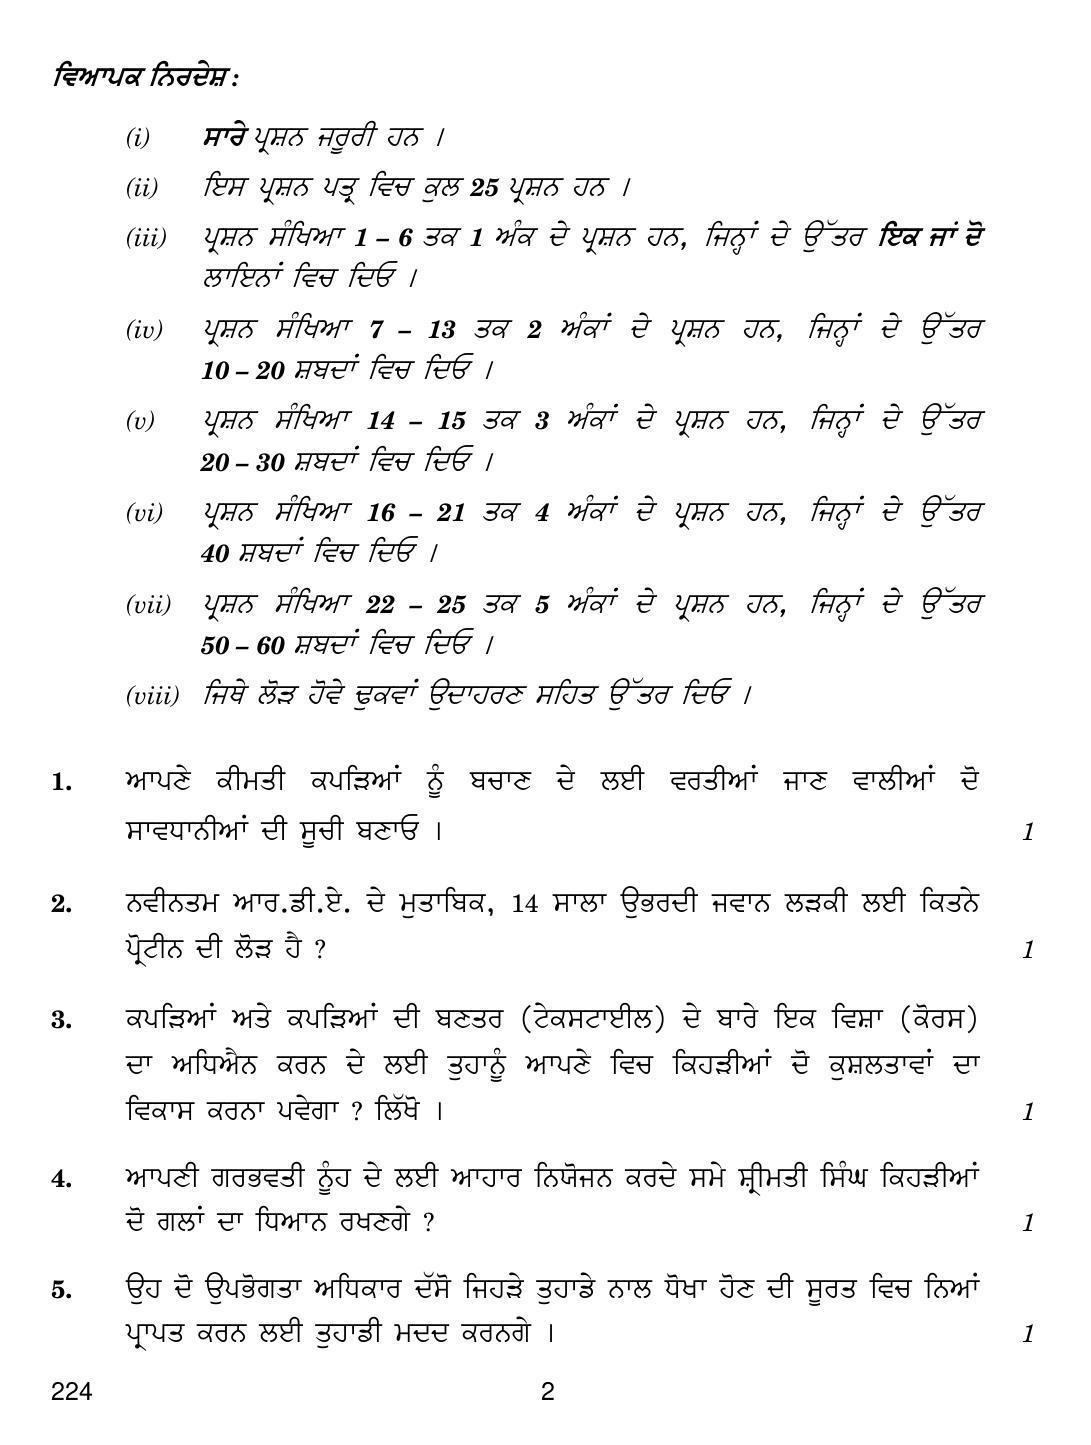 CBSE Class 12 224 HOME SCIENCE PUNJABI VERSION 2018 Question Paper - Page 2